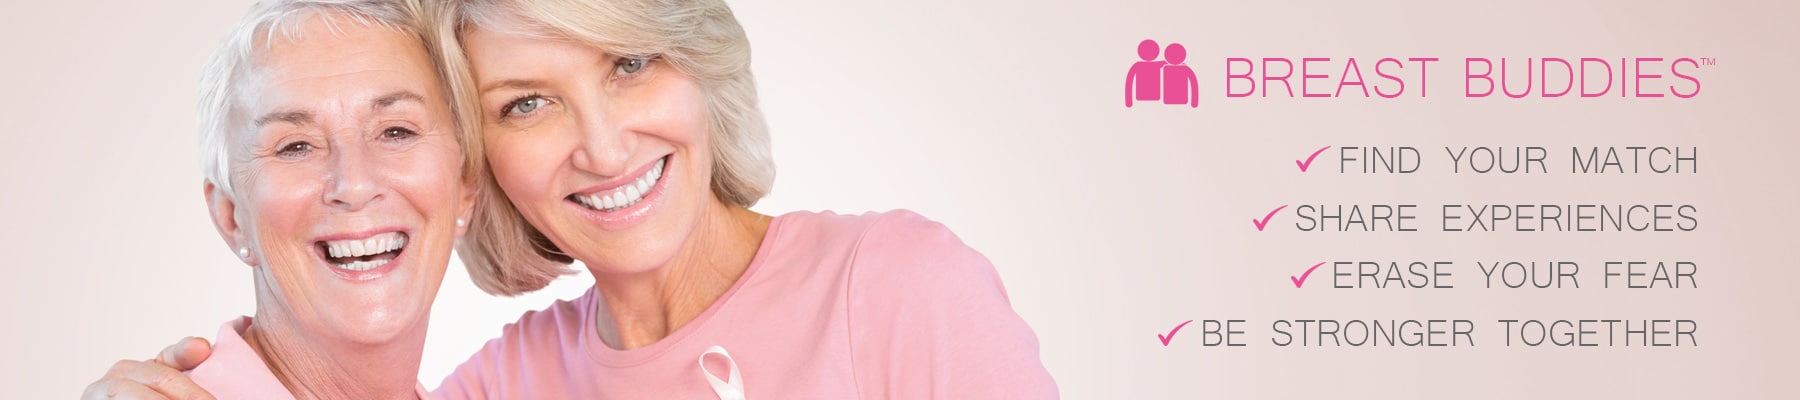 breast buddies program showcasing two middle aged women dressed in pink hugging each other